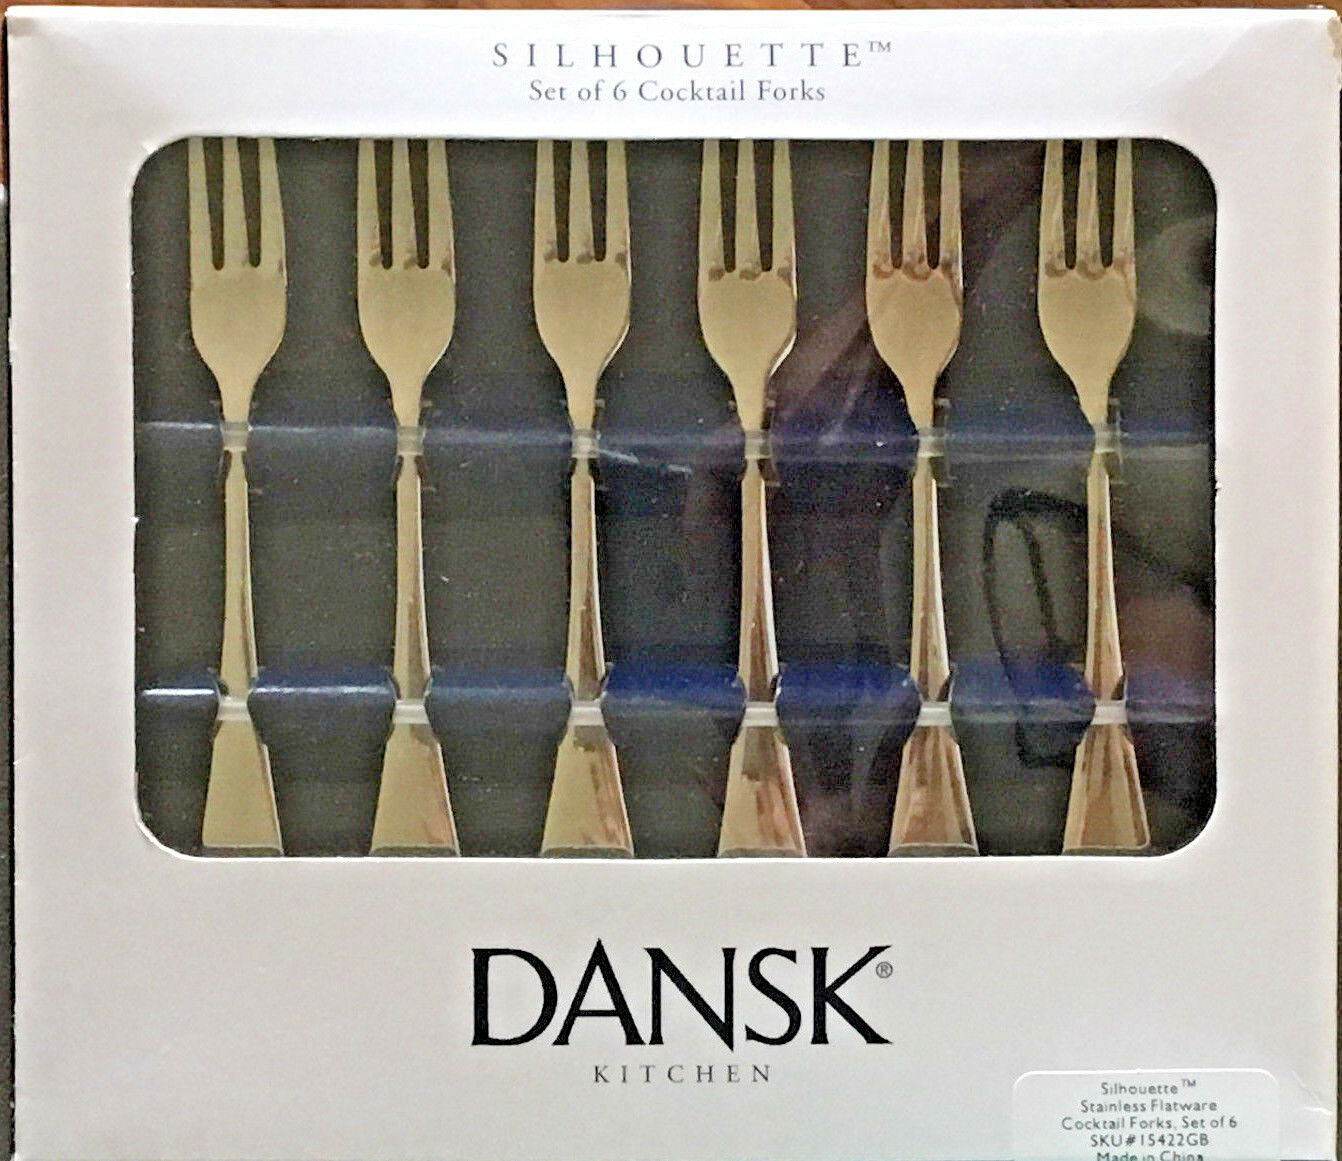 Dinner Fork Unknown 03 Tools of the Trade Indonesia Stainless Silverware